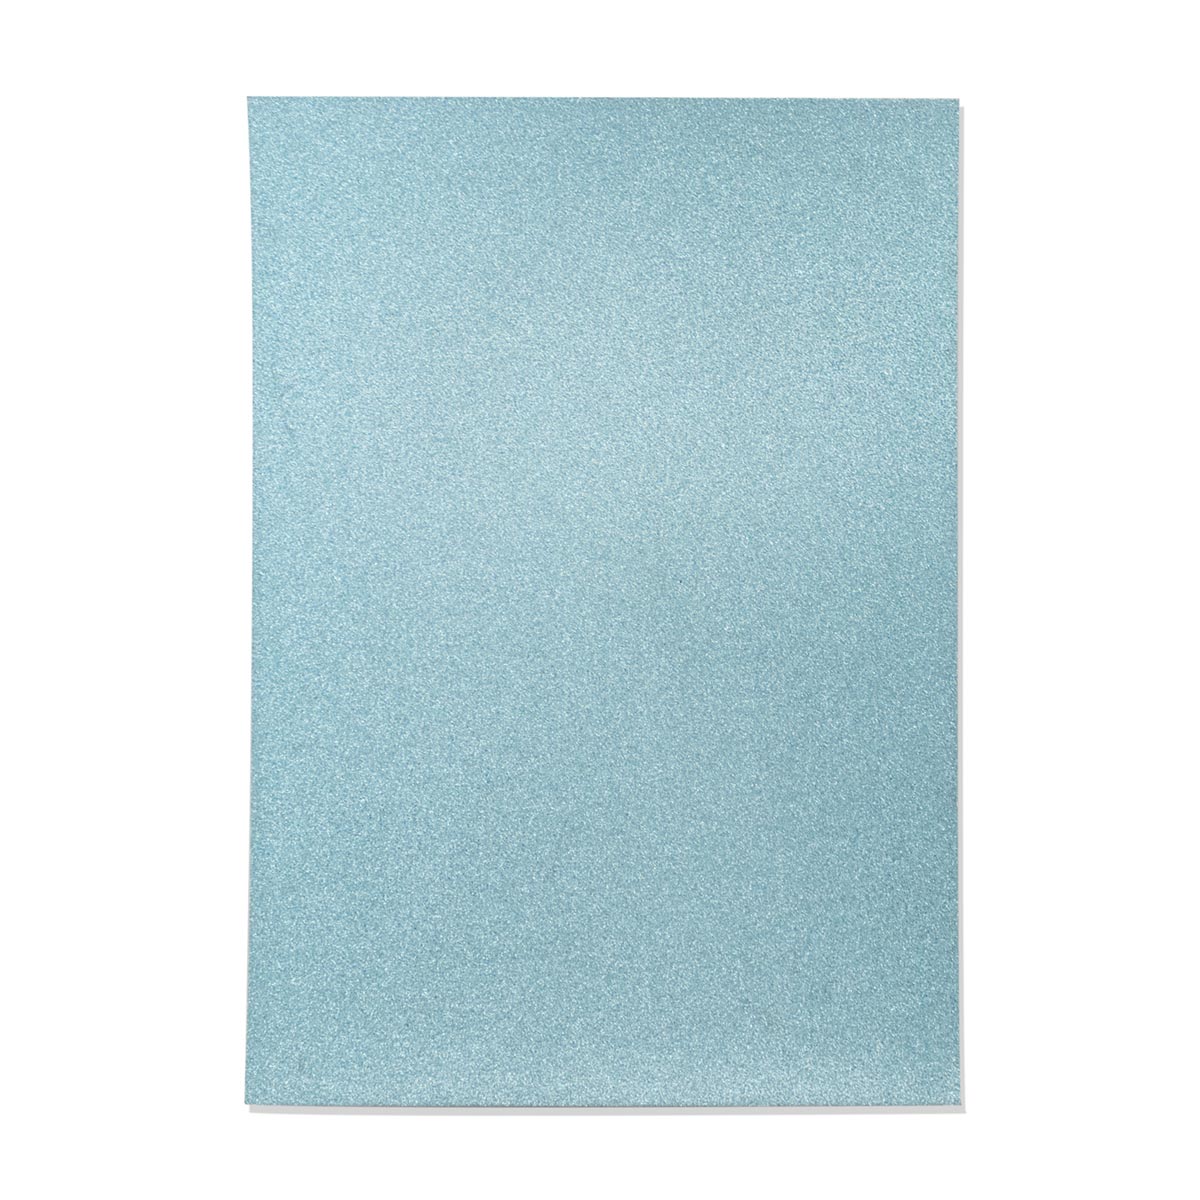 Crafter's Companion - A4 Glitter Card - 250gsm 10 Sheets - Baby Blue